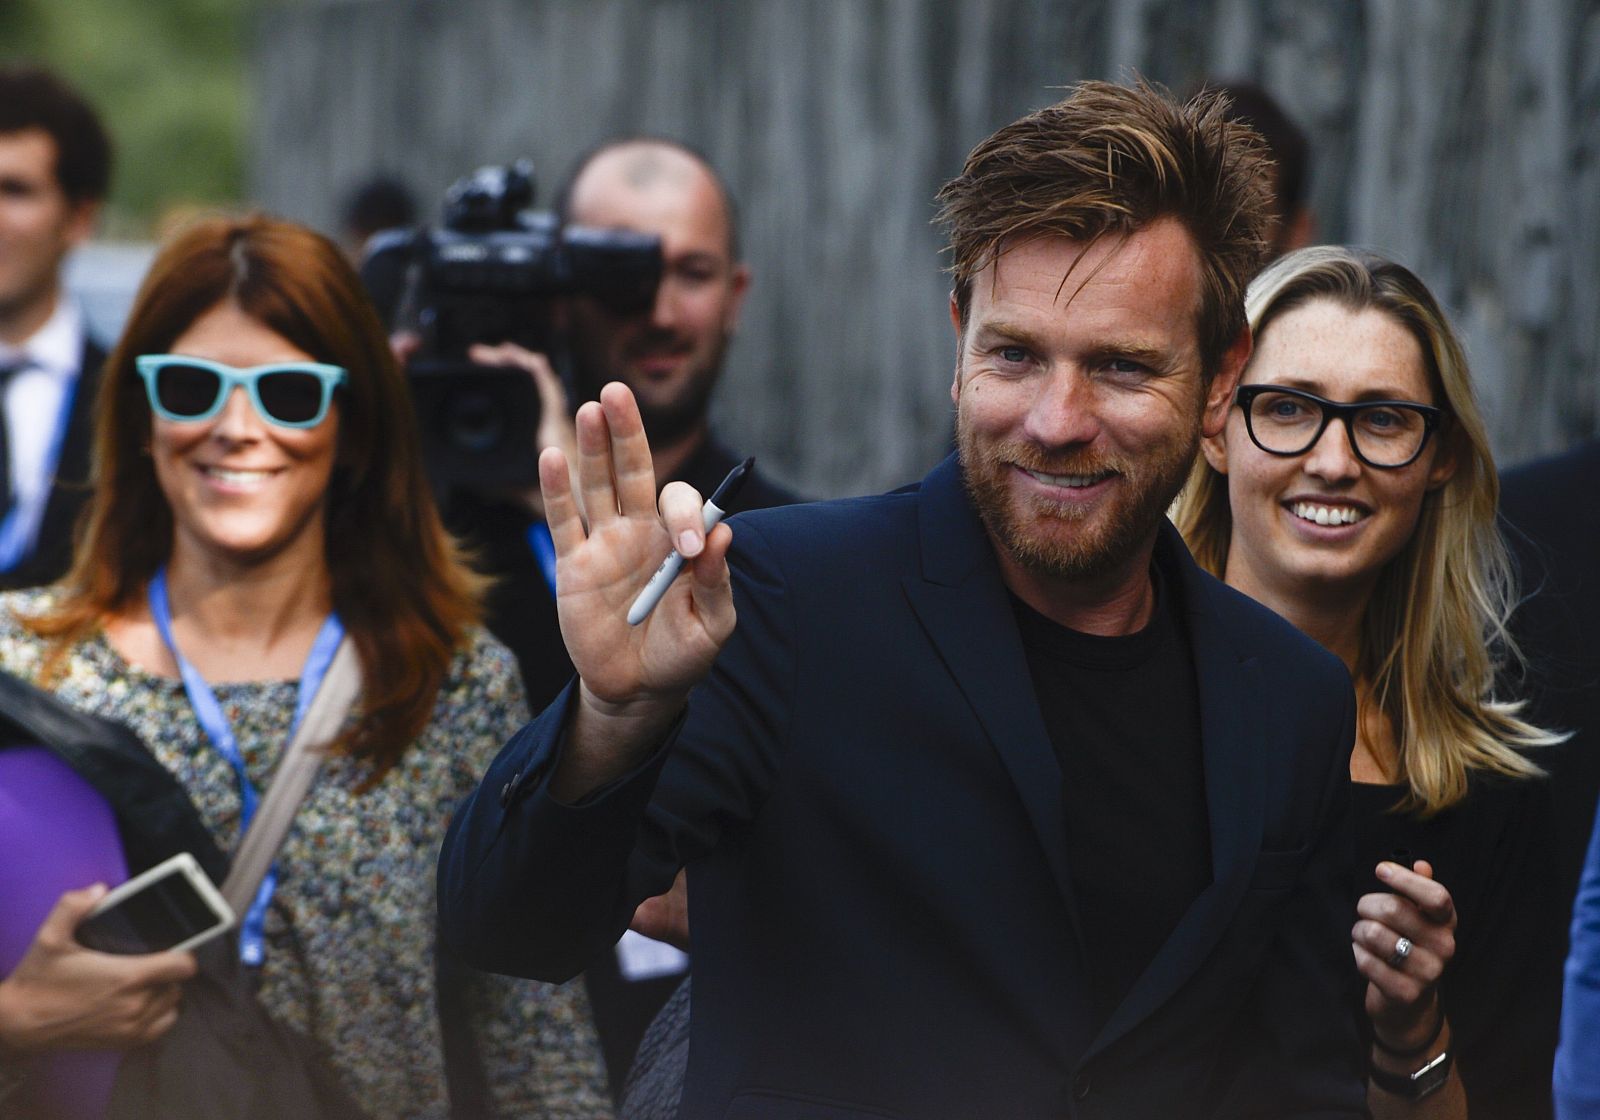 Actor McGregor waves to fans after photocall to promote movie "The Impossible" on the seventh day of the 60th San Sebastian Film Festival